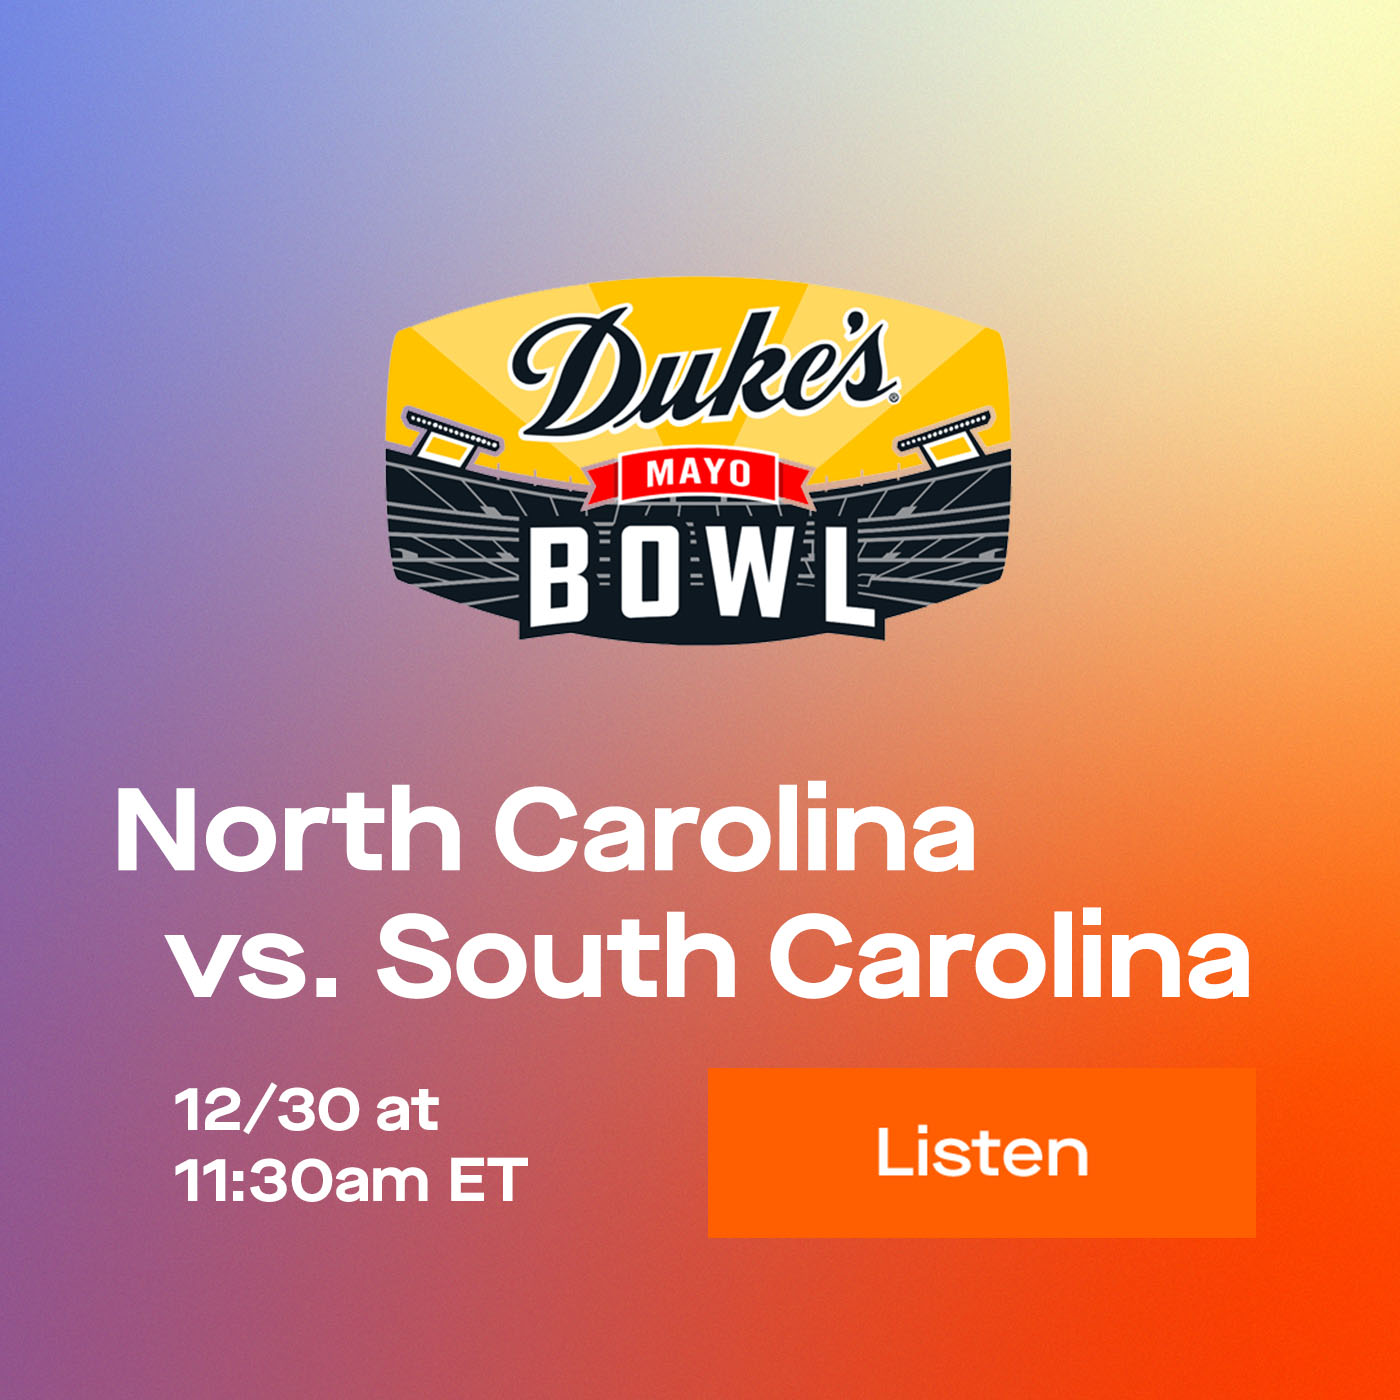 Listen to the Duke's Mayo Bowl on Audacy